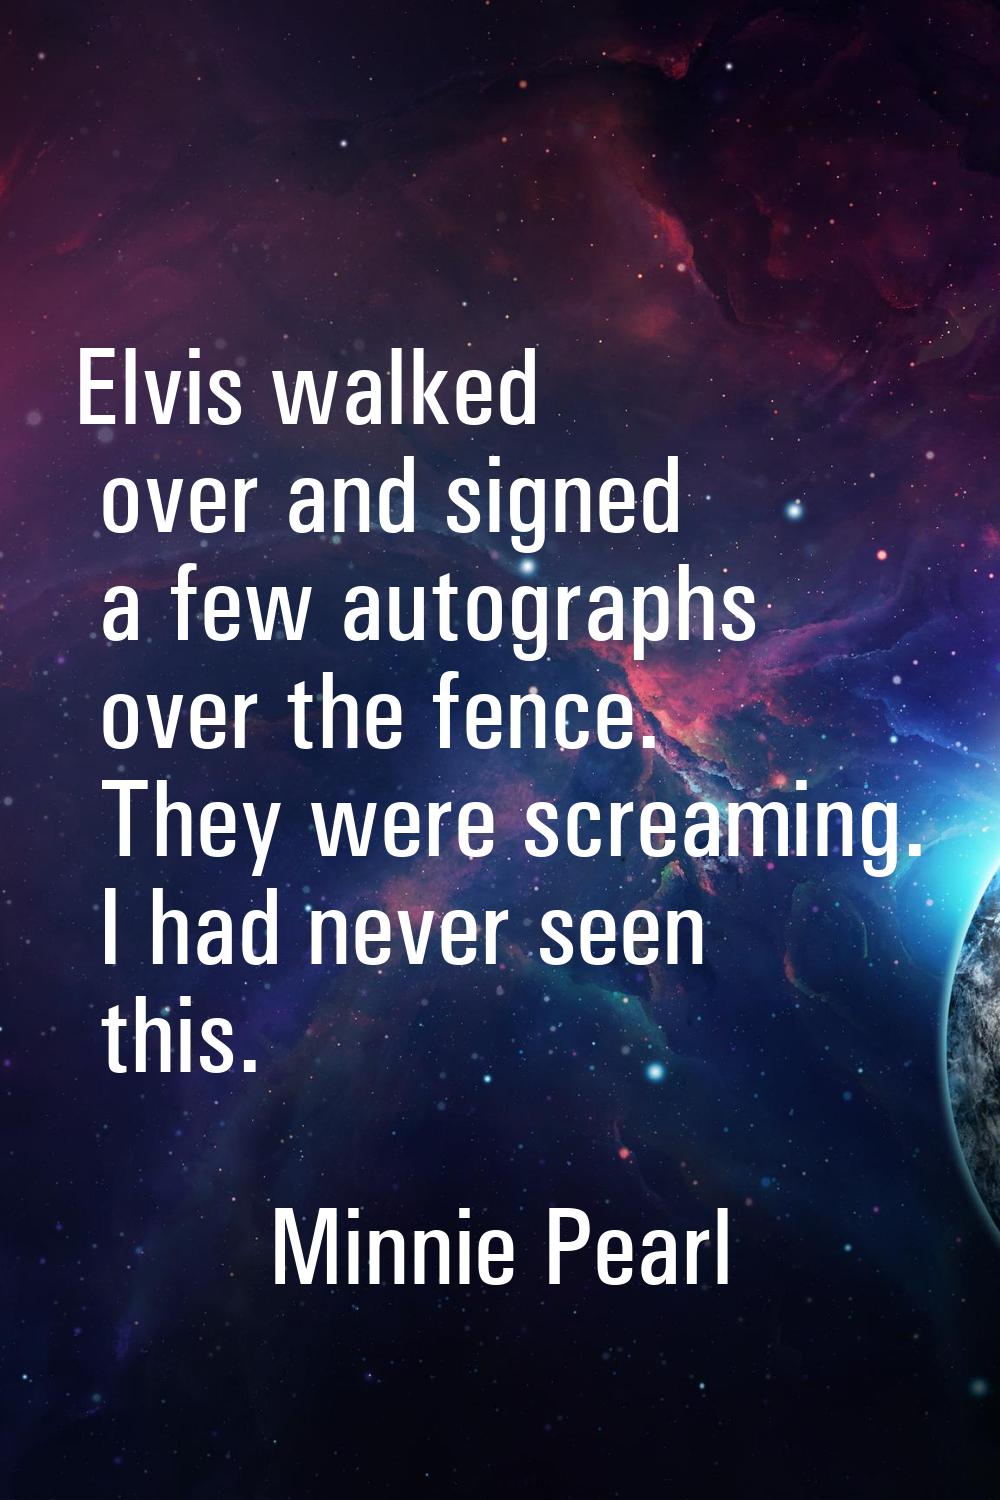 Elvis walked over and signed a few autographs over the fence. They were screaming. I had never seen